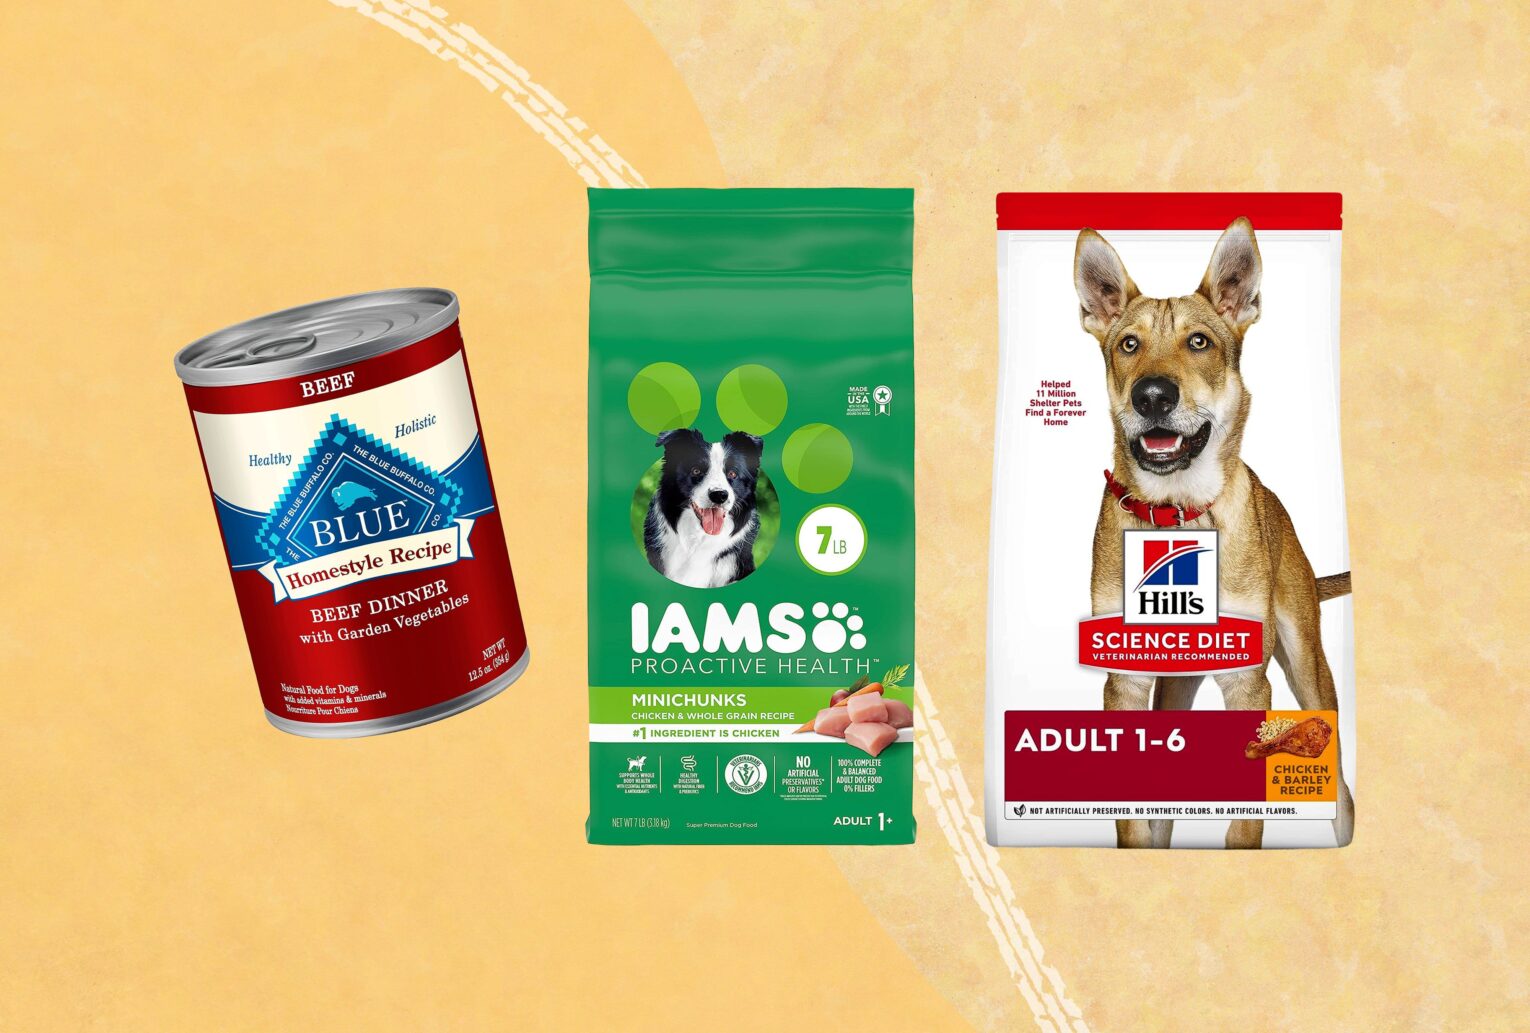 Fresh Dog Food: Is It Worth the Investment?